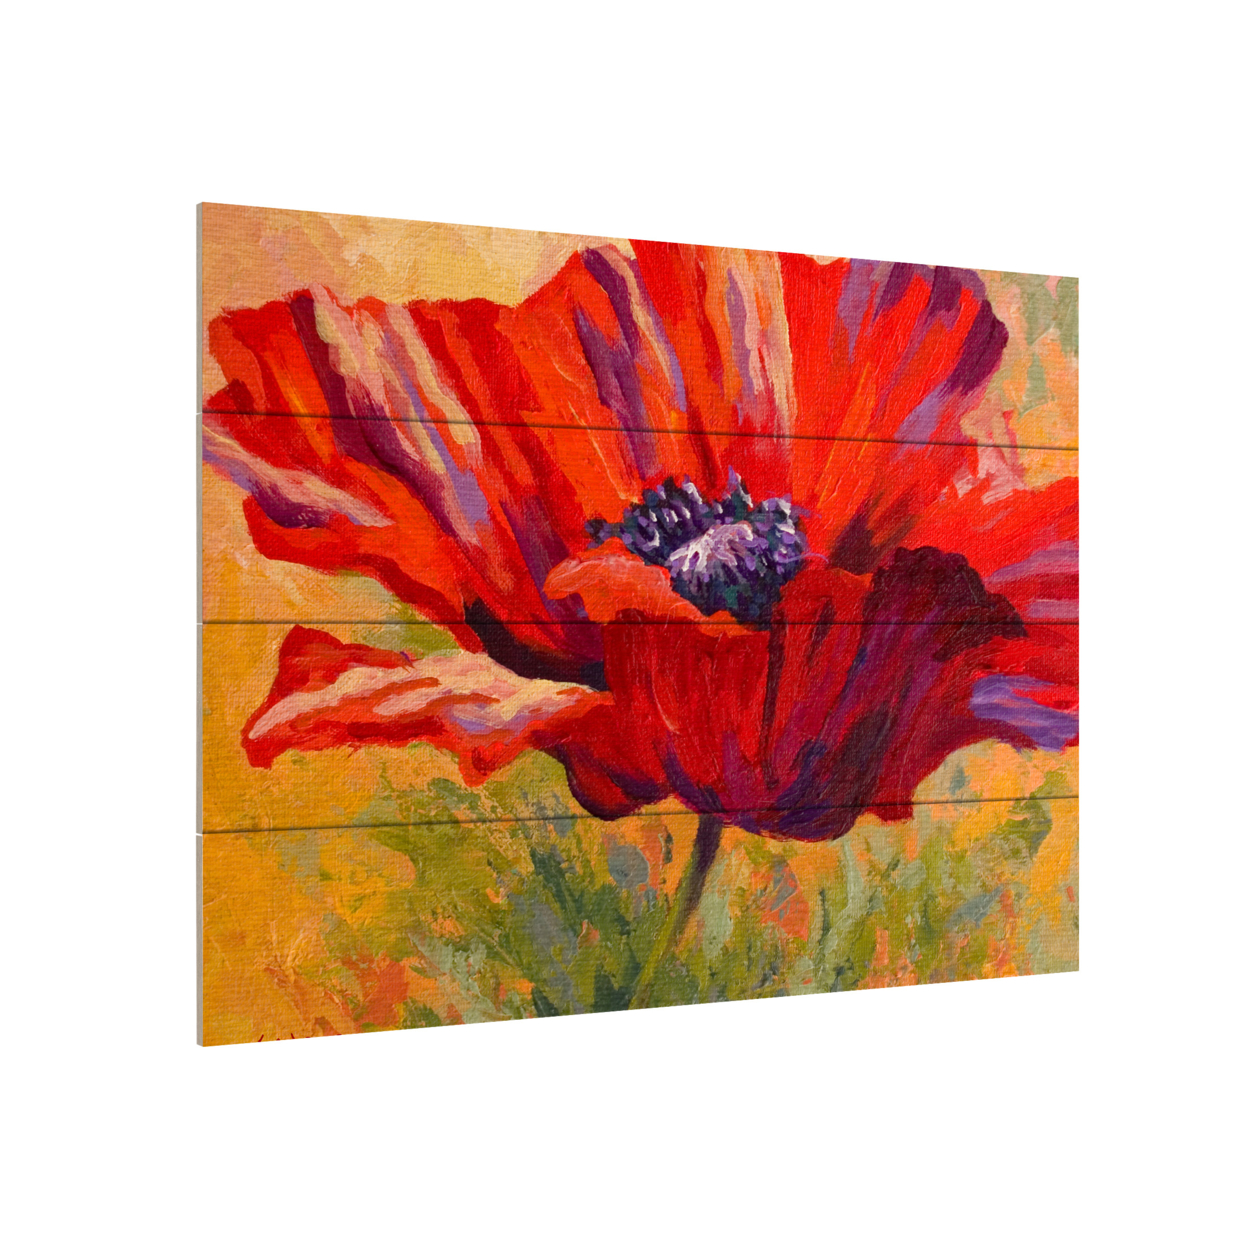 Wall Art 12 X 16 Inches Titled Red Poppy II Ready To Hang Printed On Wooden Planks